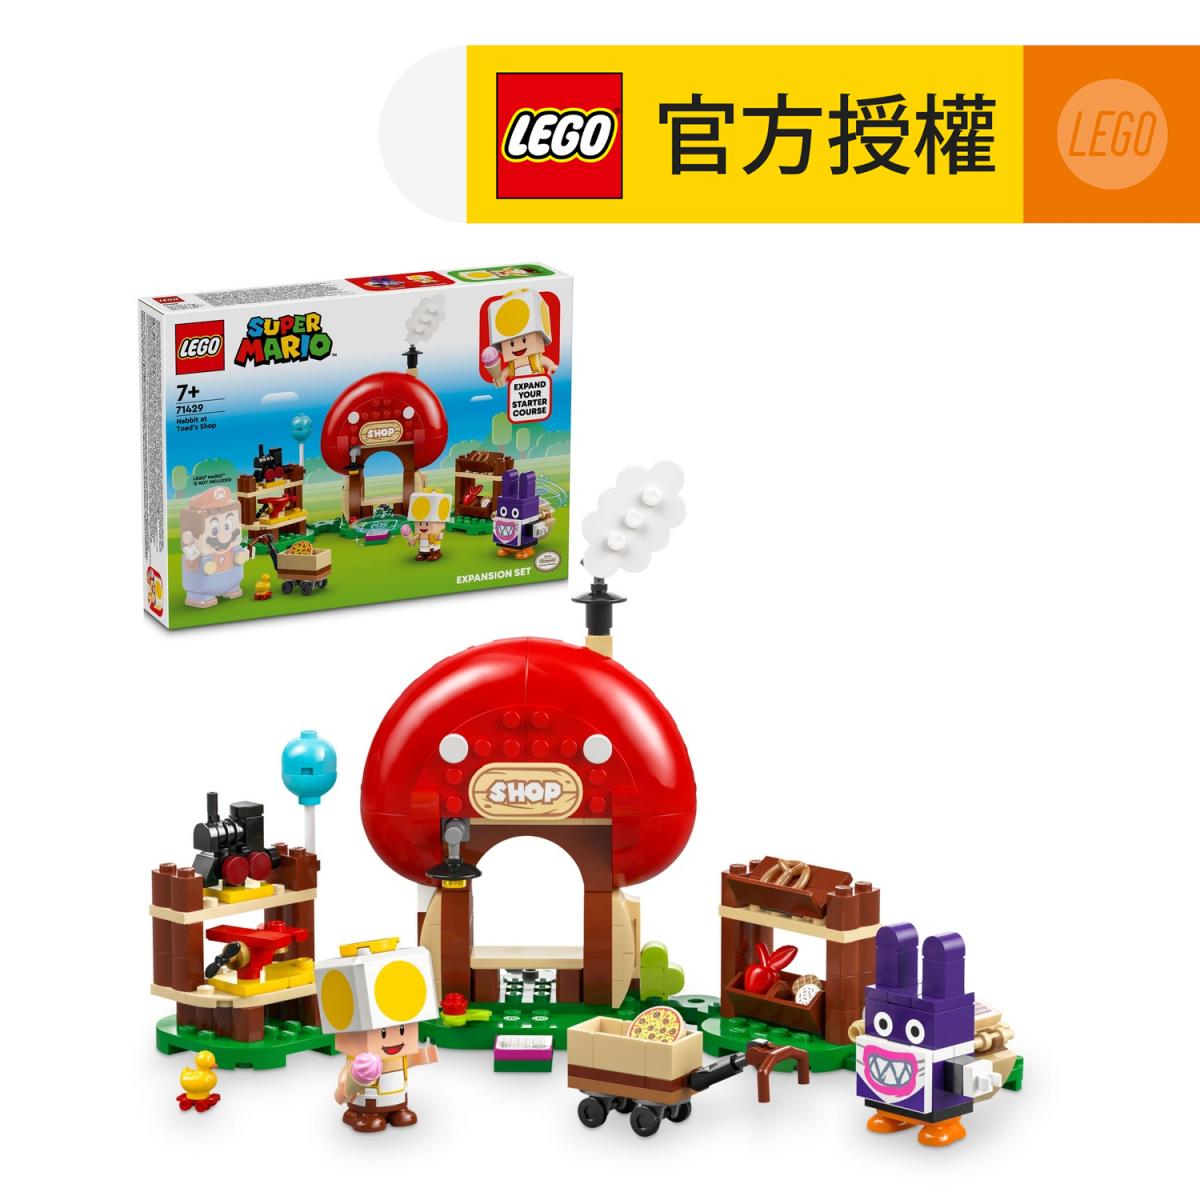 LEGO® Super Mario™ 71429 Nabbit at Toad's Shop Expansion Set (Toys,Super Mario Toys,Kids Toy,Role-Play Toys,Gift)